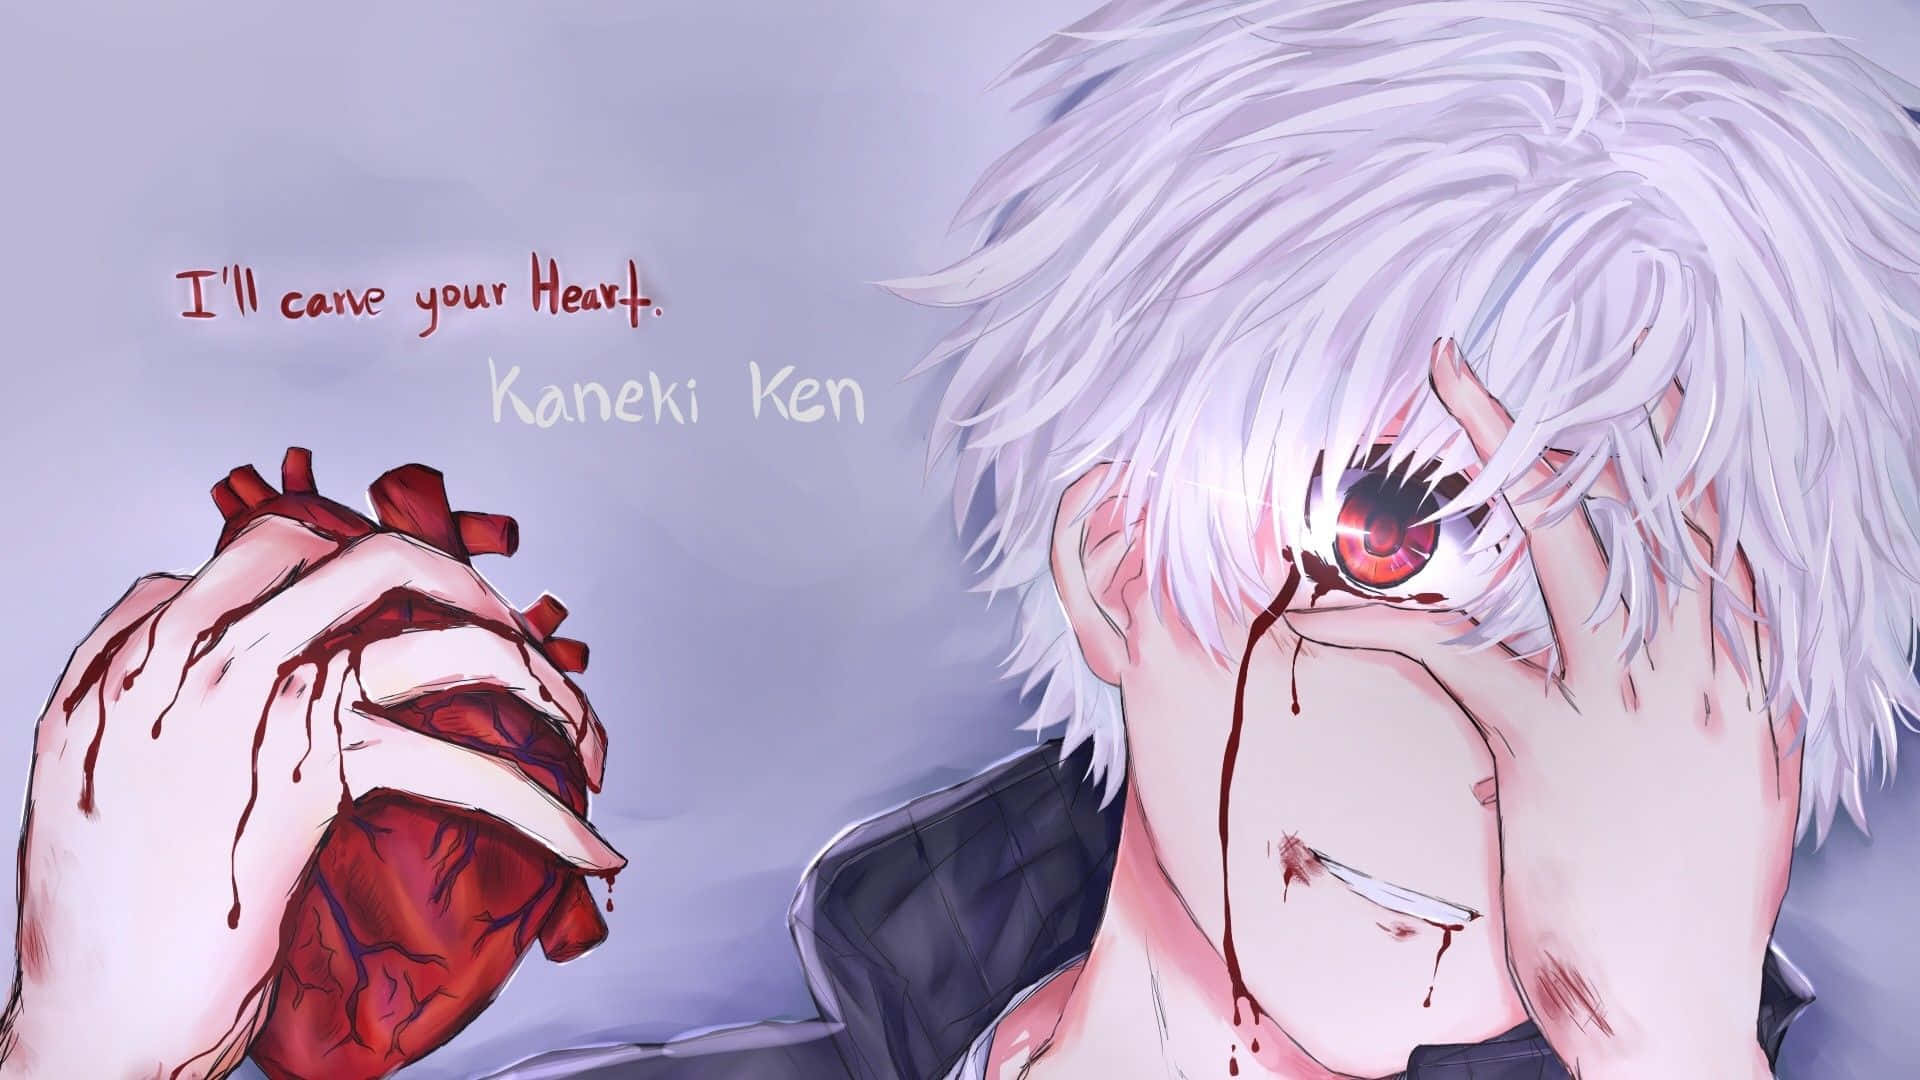 Anime, Ken, Kaneki Themes & Live Wallpapers for Android - Download | Bazaar